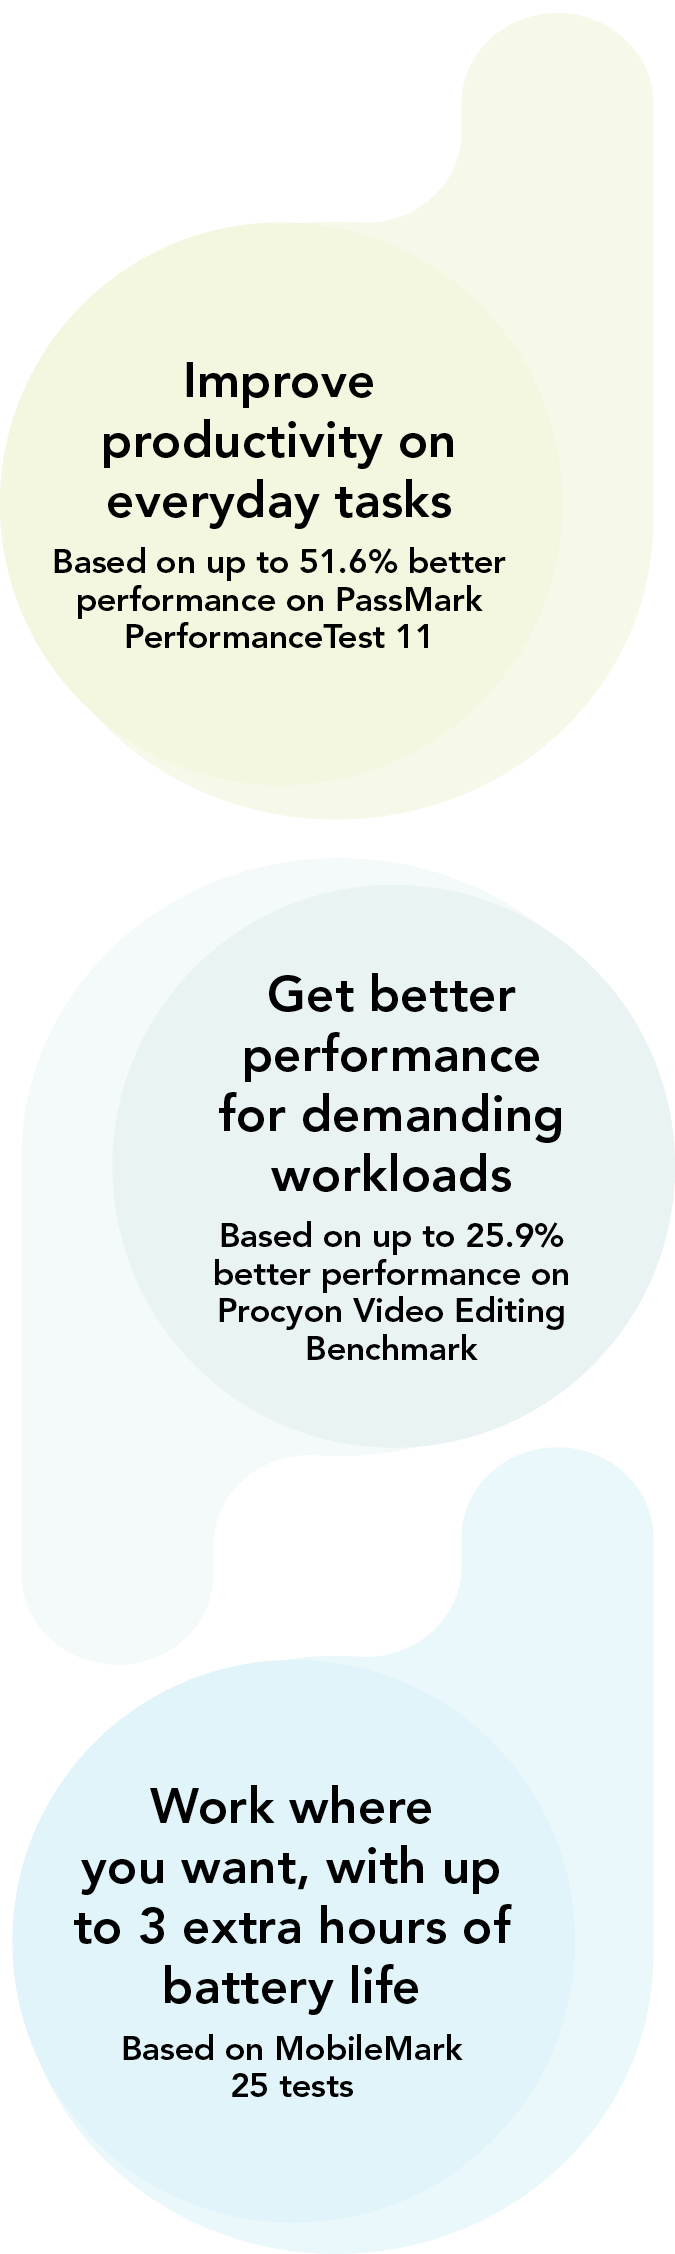 Improve productivity on everyday tasks (based on up to 51.6% better performance on PassMark PerformanceTest 11). Get better performance for demanding workloads (based on up to 25.9% better performance on Procyon Video Editing Benchmark). Work where you want, with up to 3 hours of extra battery life (based on MobileMark 25 tests).